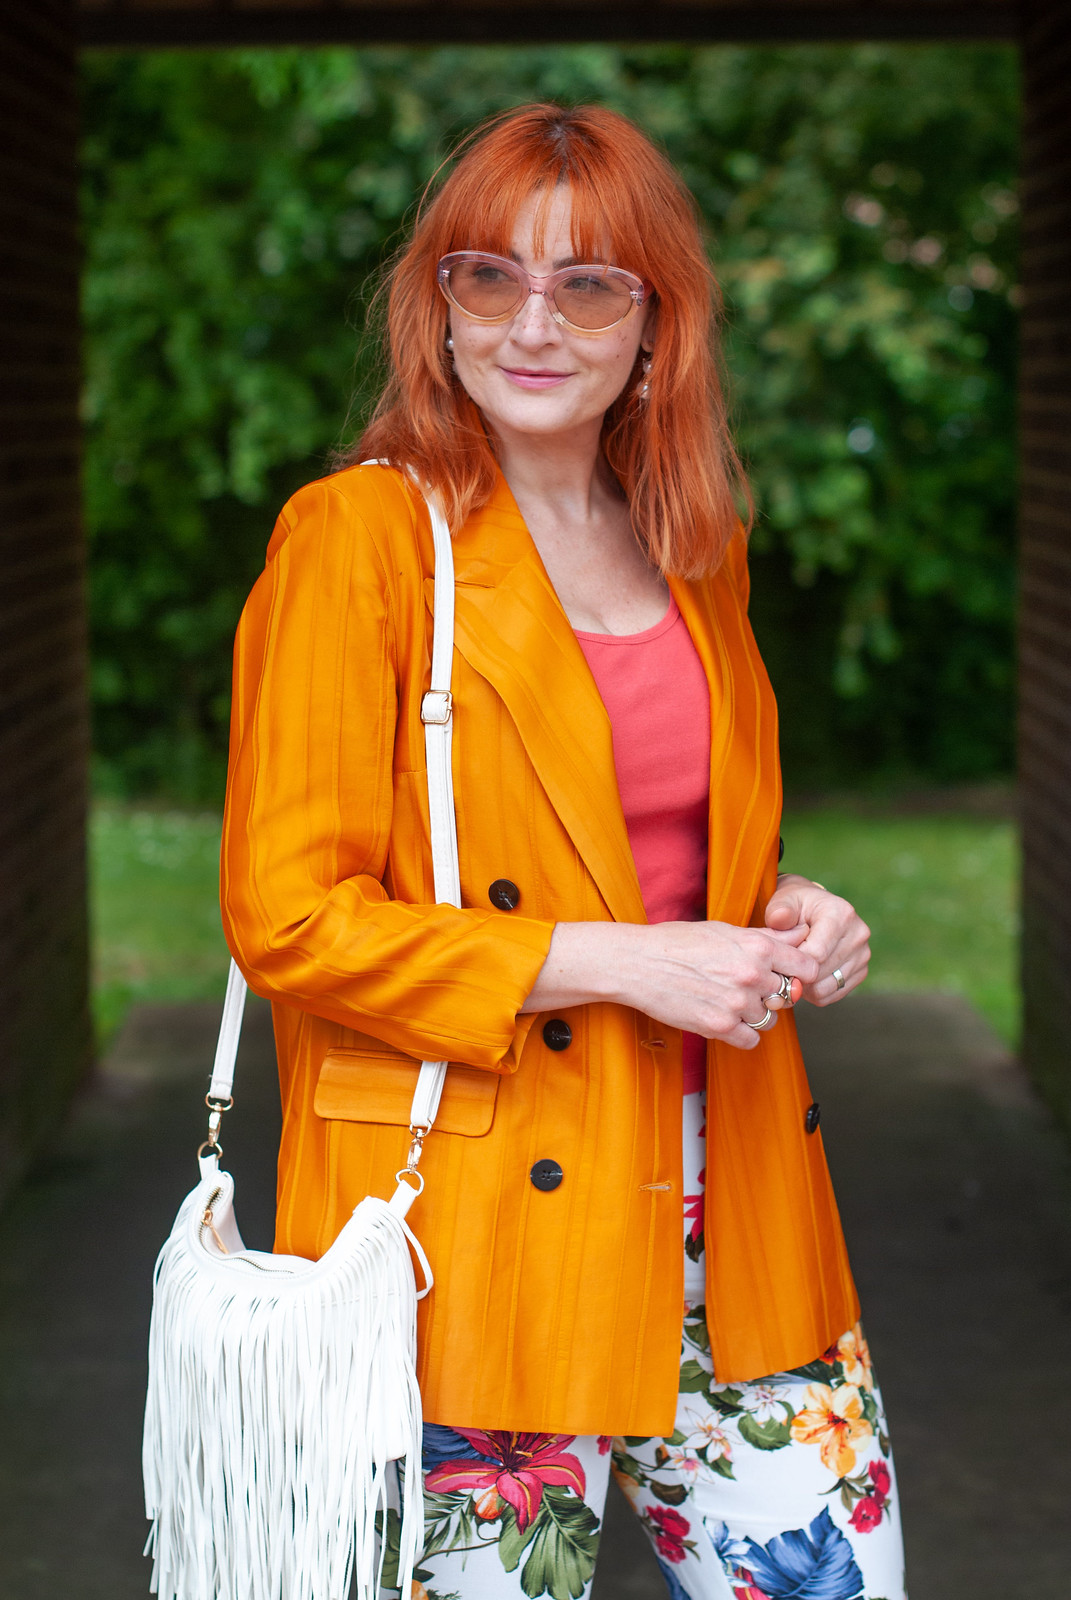 Fashion Over 40: The Art of Wearing Stylish Trainers for Walking, Shopping and Sightseeing | Not Dressed As Lamb, Over 40 Style Blogger